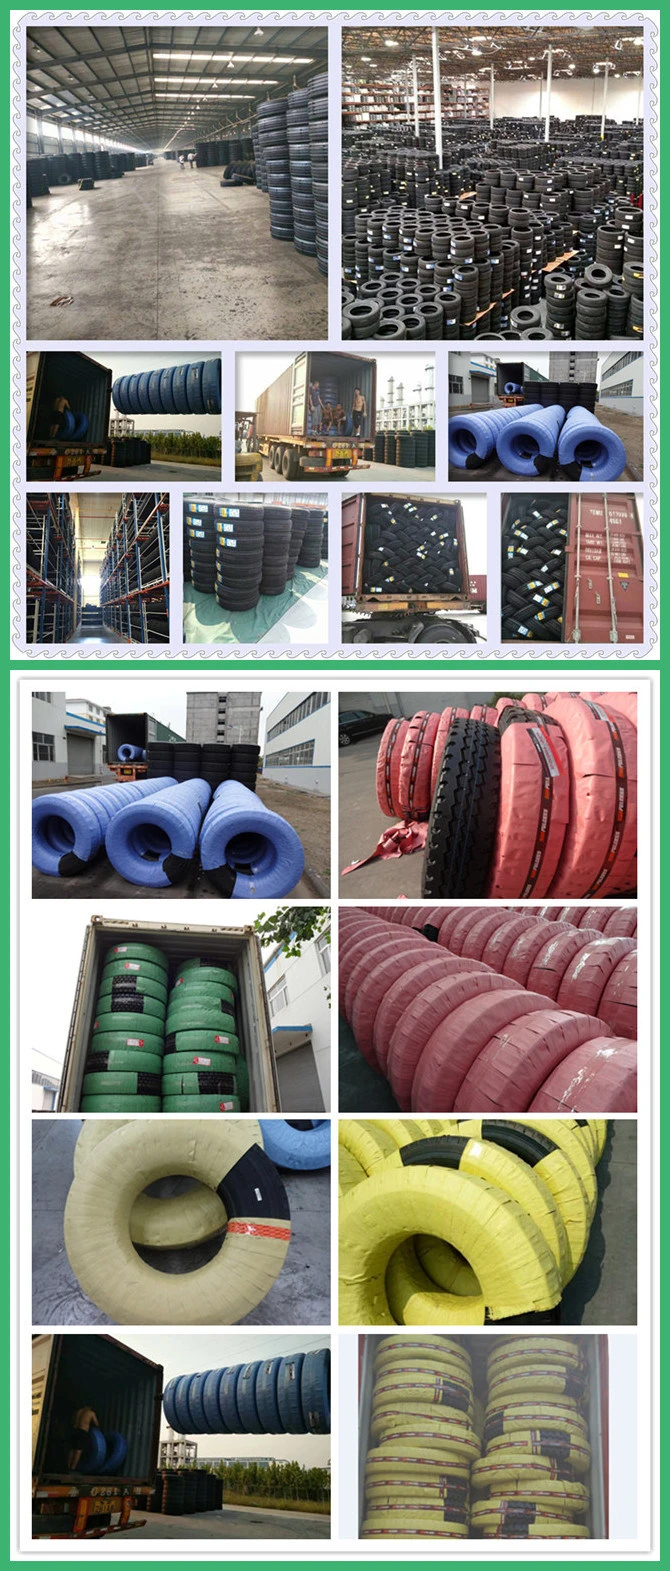 Auto Body Part Mercedes Benz Truck Parts Rubber Tyre Steel Radial Truck Tyre